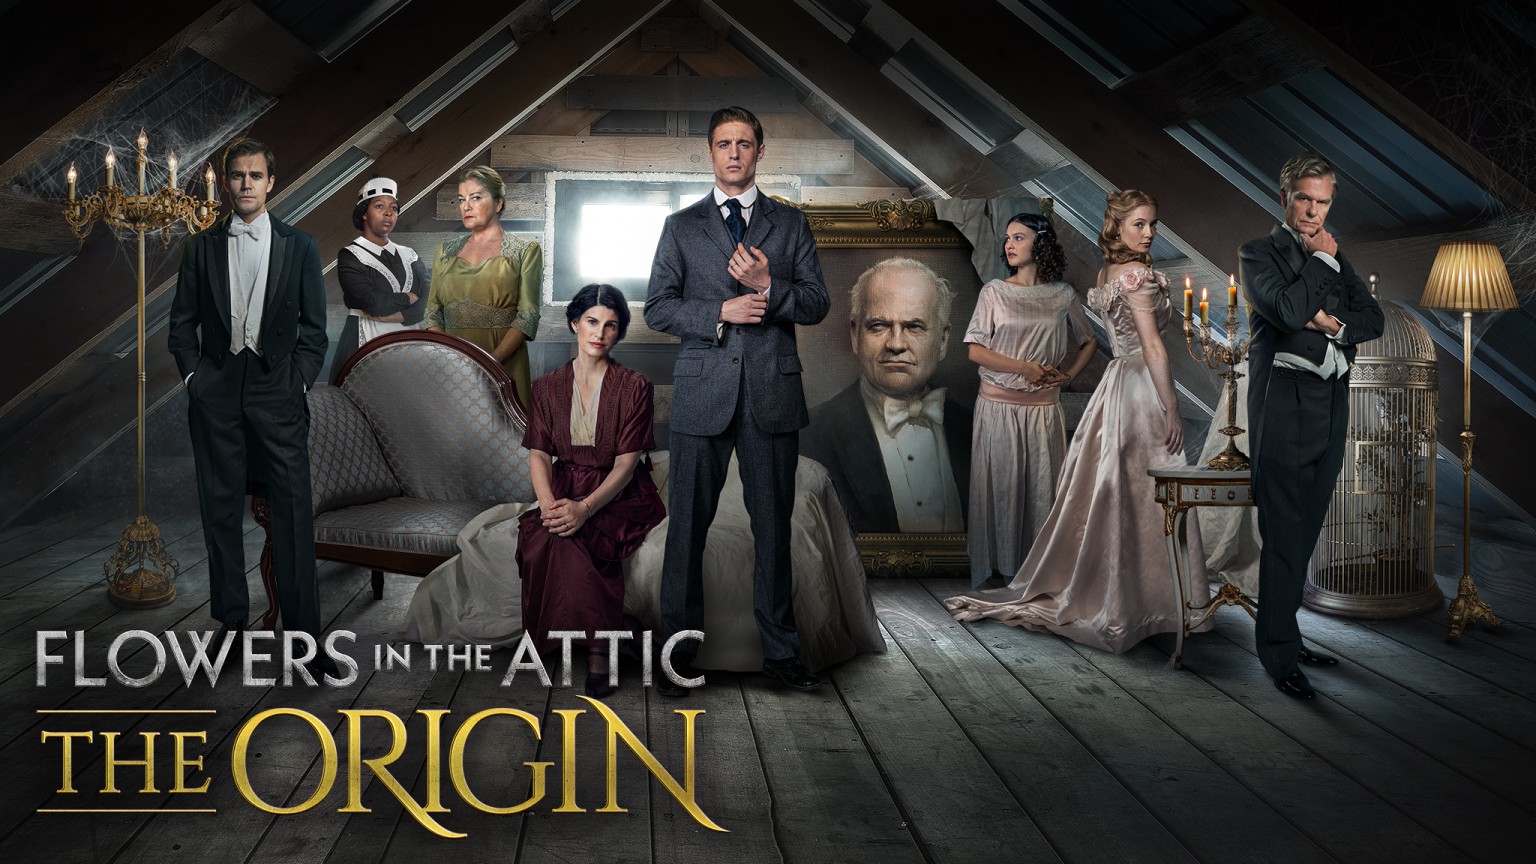 How To Watch Flowers In The Attic The Origin Online From Anywhere Stream The Mini Series